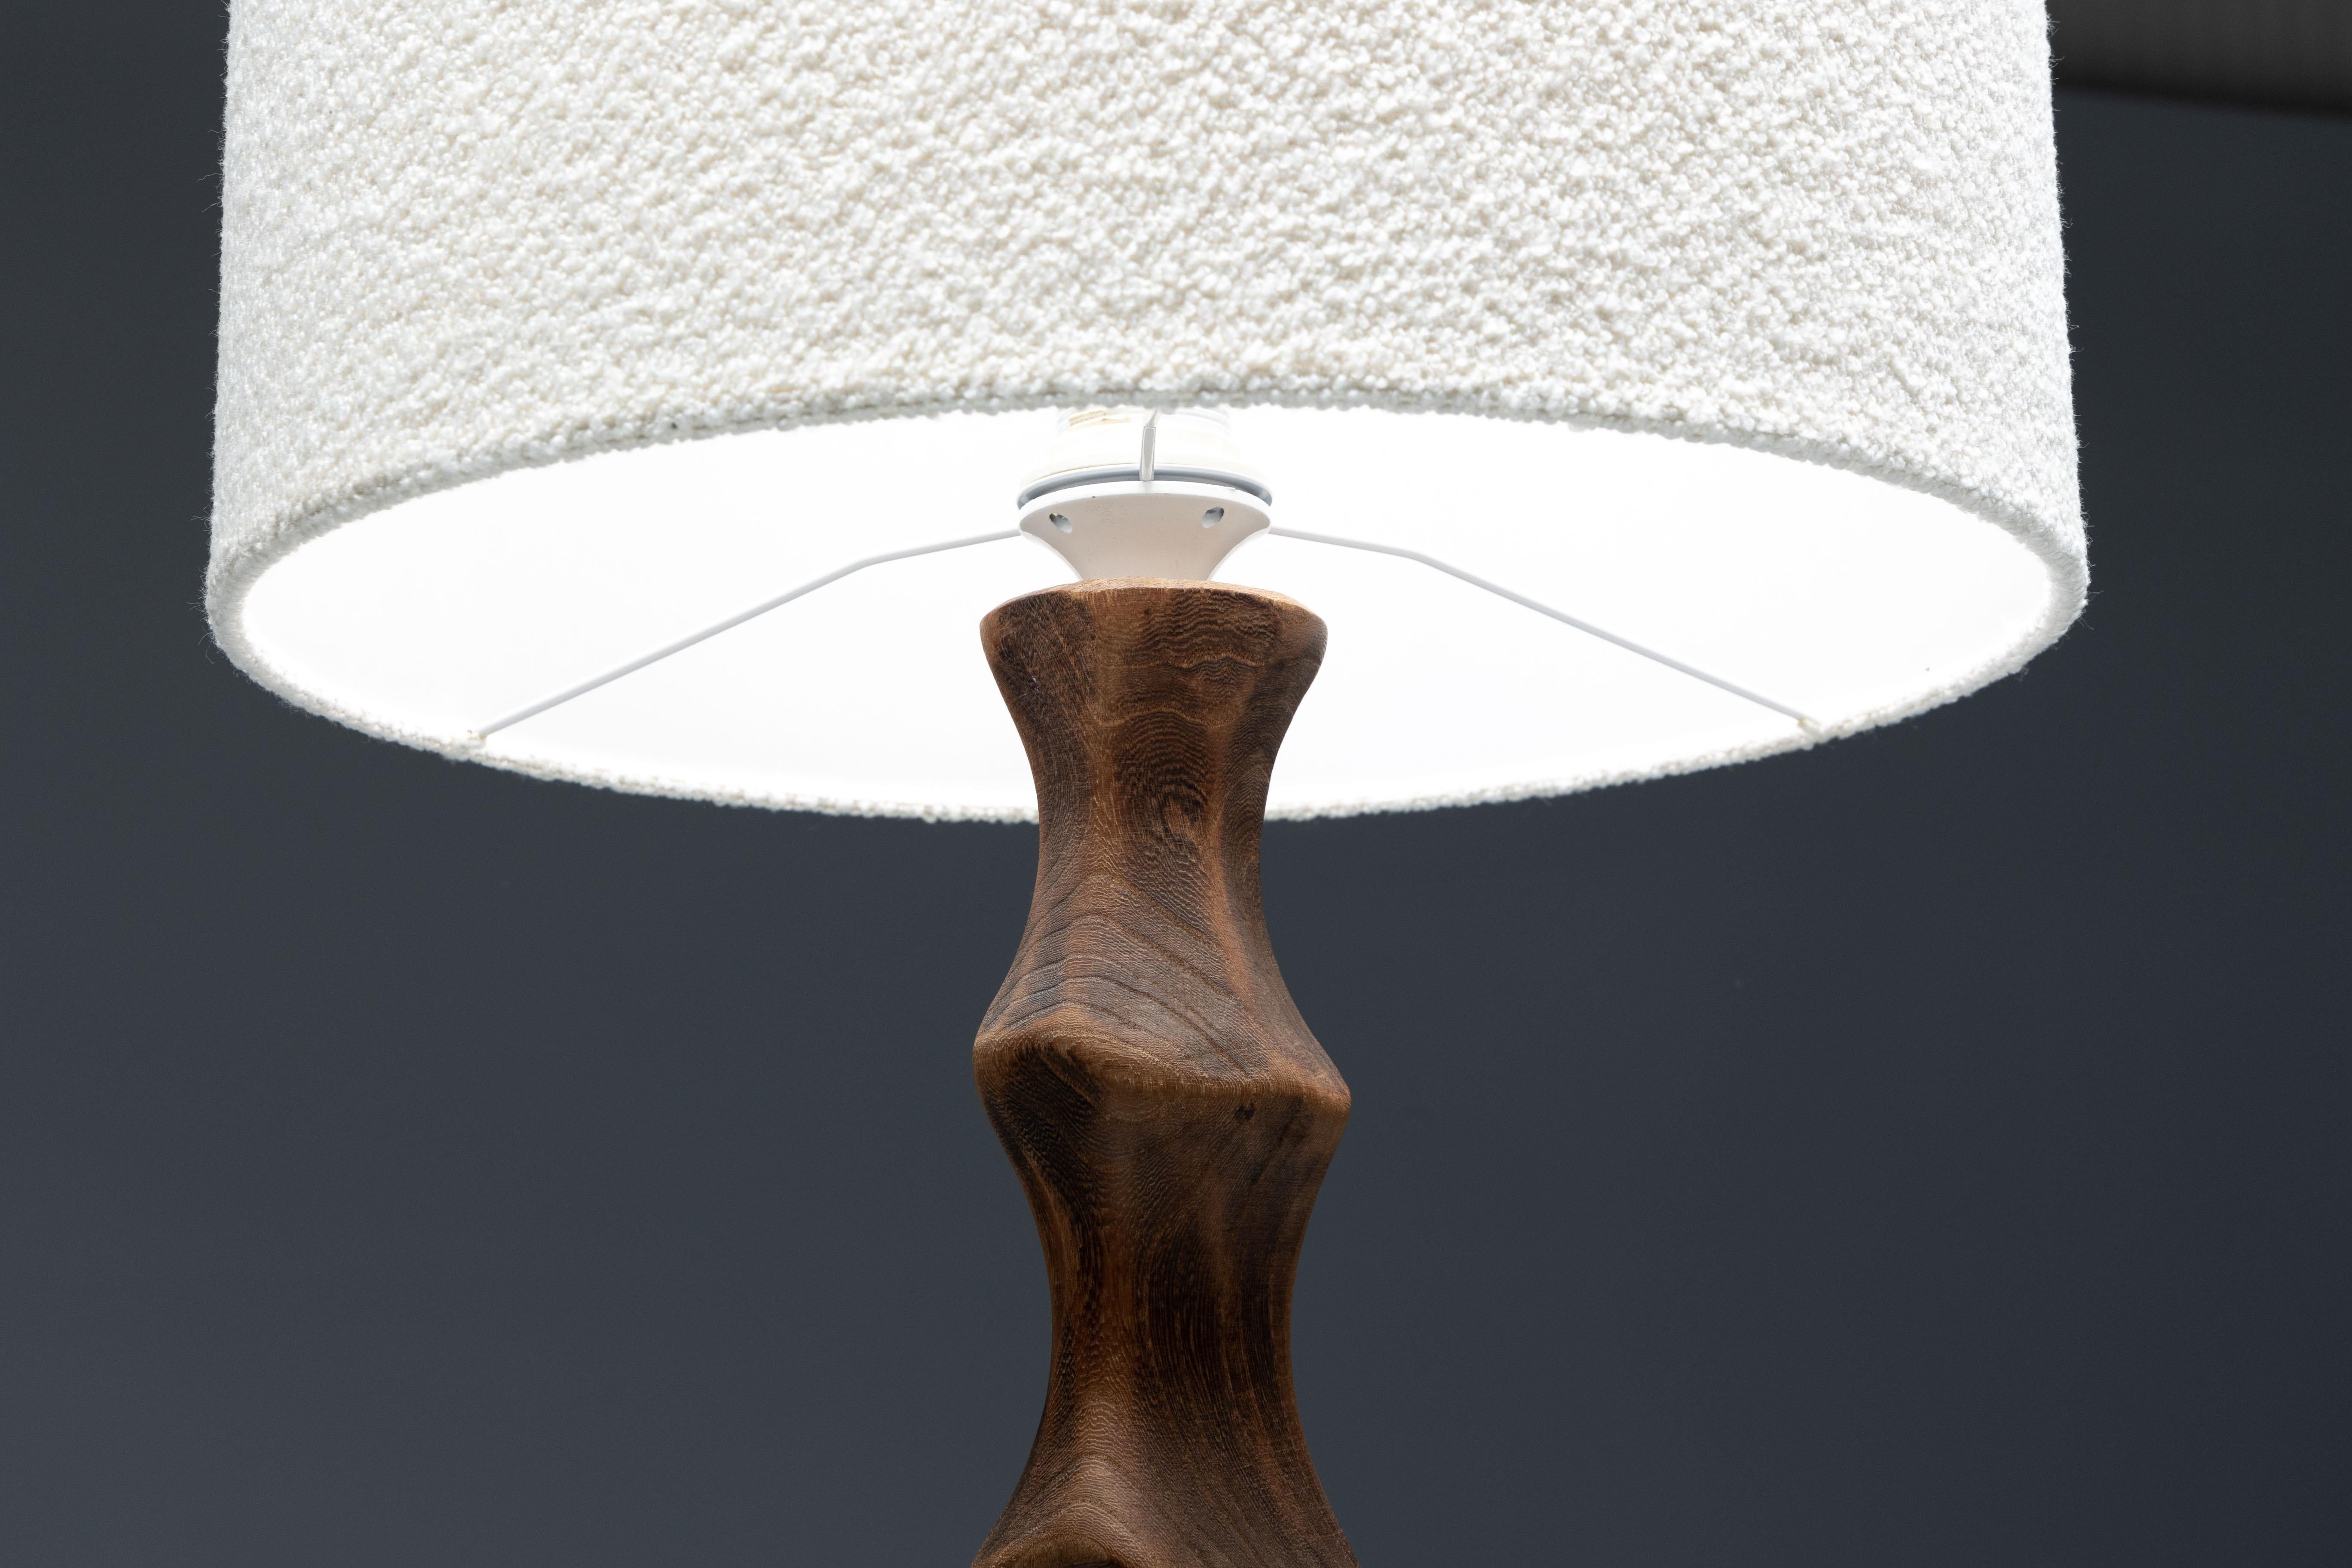 Wood Brutalist Travail Populaire Table Lamp, France, 1970s For Sale